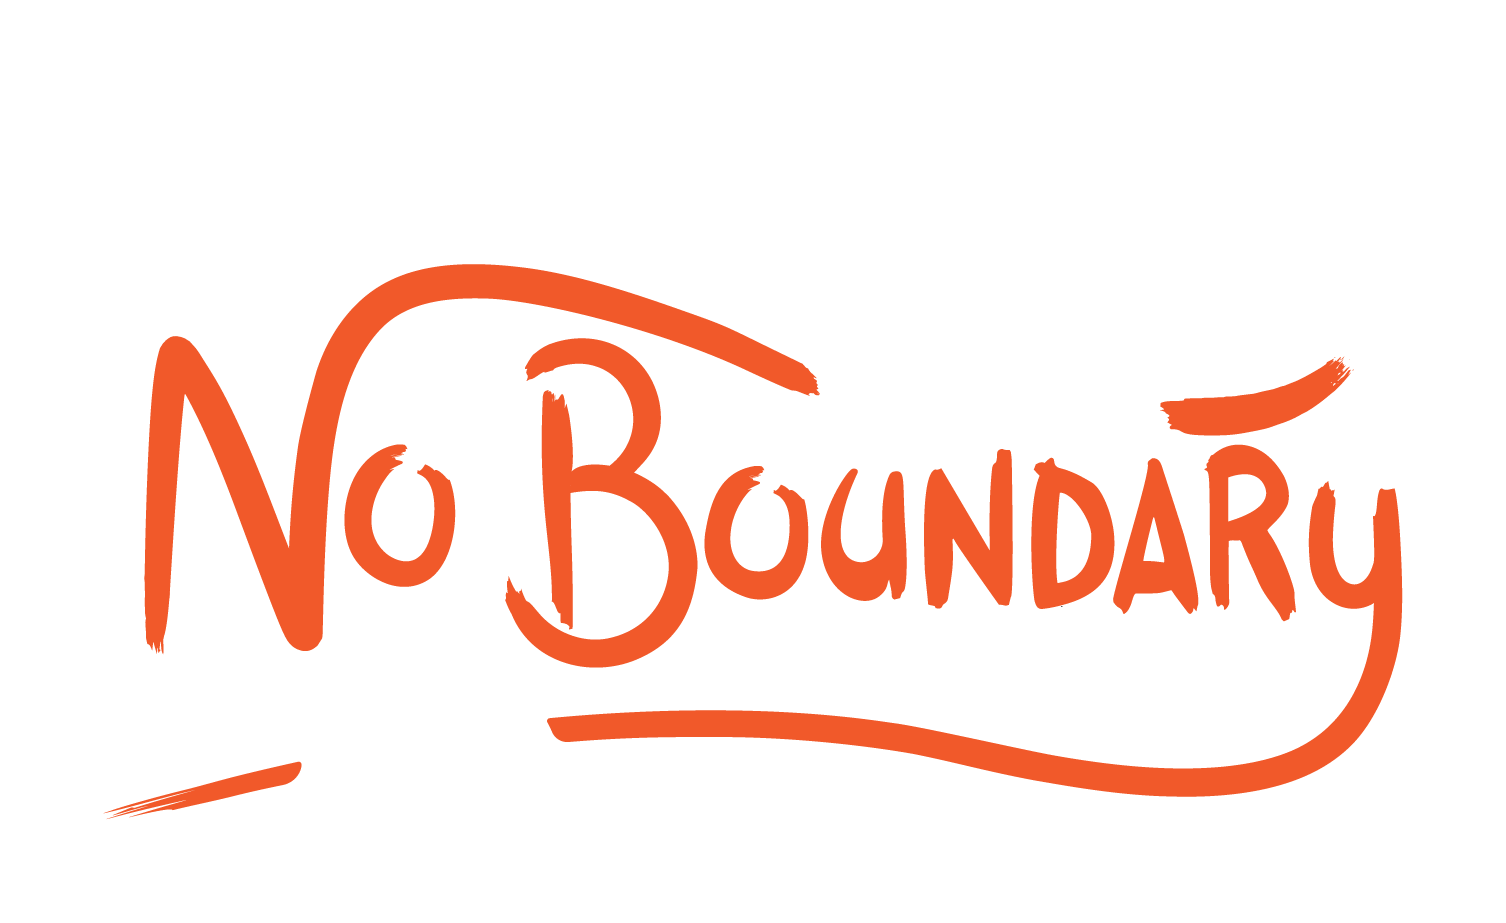 Boundary Logo - Queenstown Bike Tours & Sightseeing with No Boundary